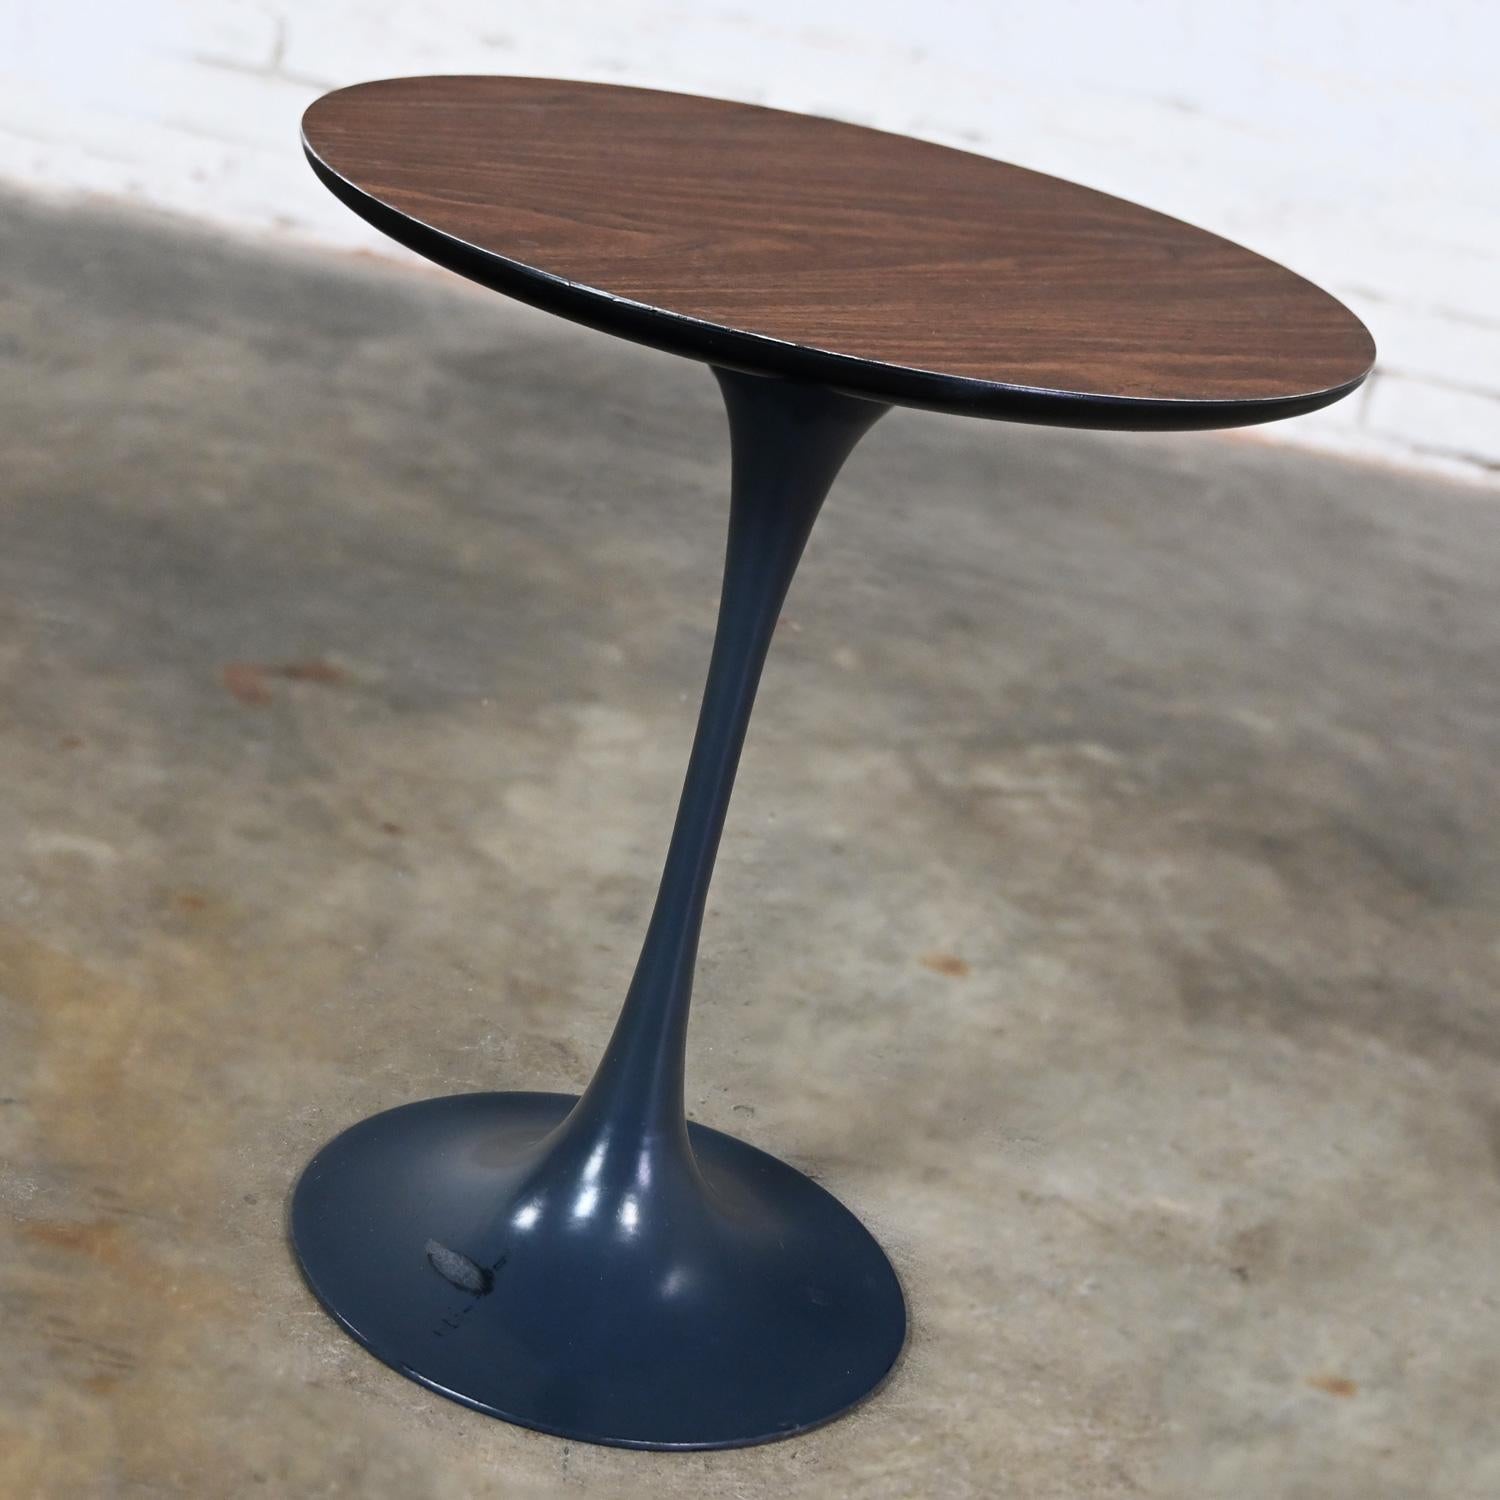 Handsome vintage MCM (a.k.a.) Mid-Century Modern Burke Division for Brunswick Tulip side table style of Eero Saarinen comprised of a wood grain laminate top with back beveled edge and a dark charcoal painted aluminum pedestal base. The Burke for